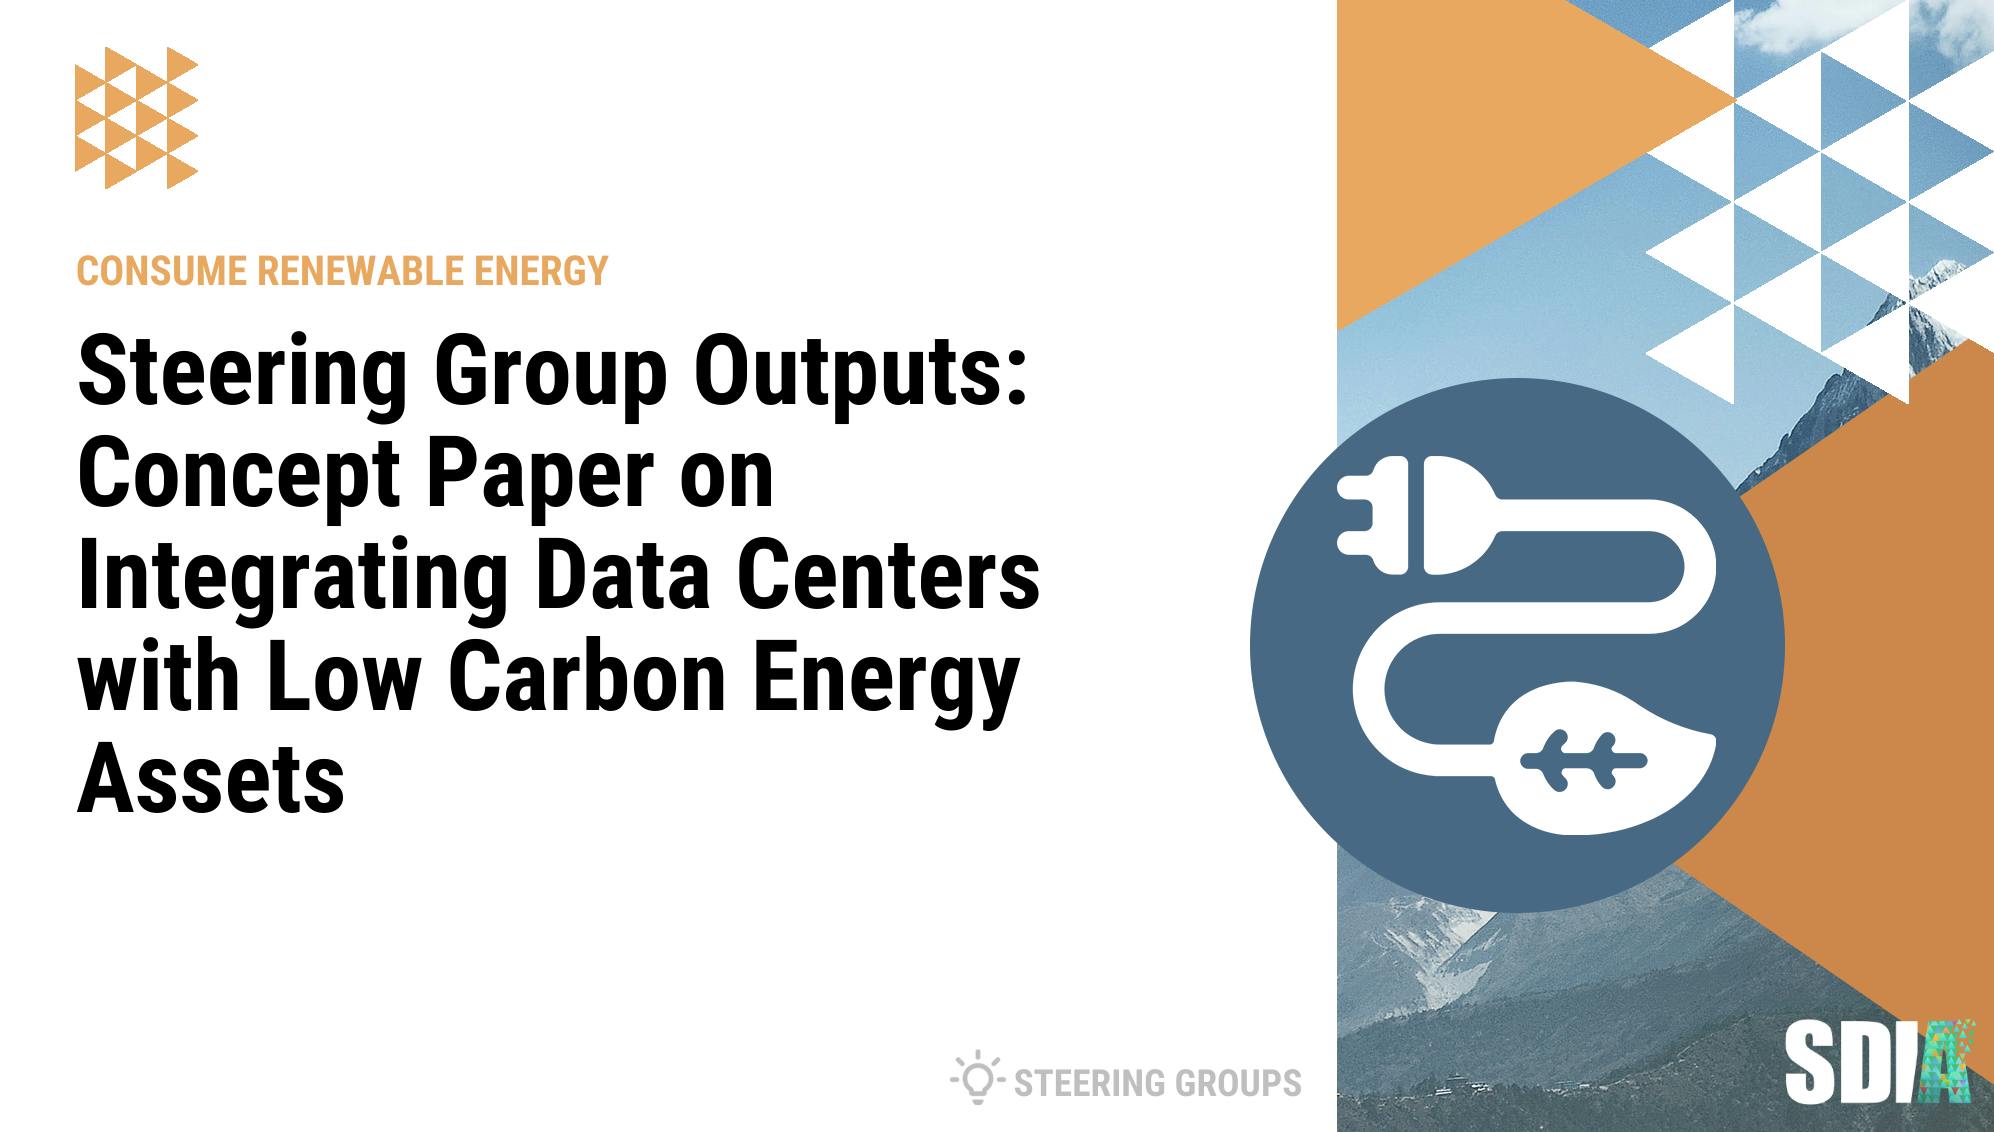 On-site Power Generation for Data Centers: Integrating Data Centers with Low Carbon Energy Assets